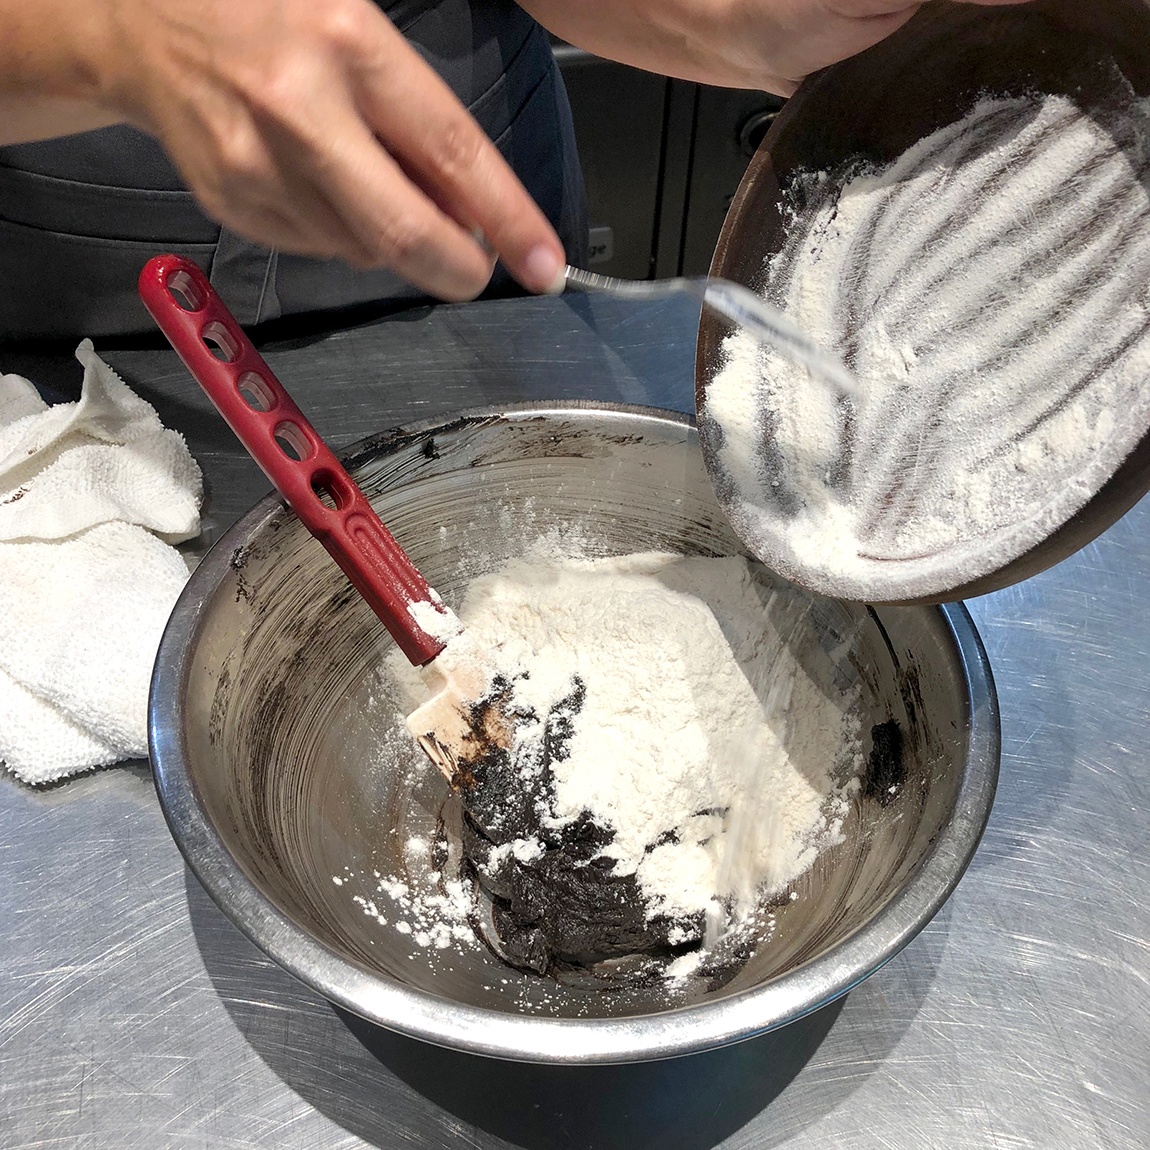 Summer Wright spoons a floury mix into a metal mixing bowl.